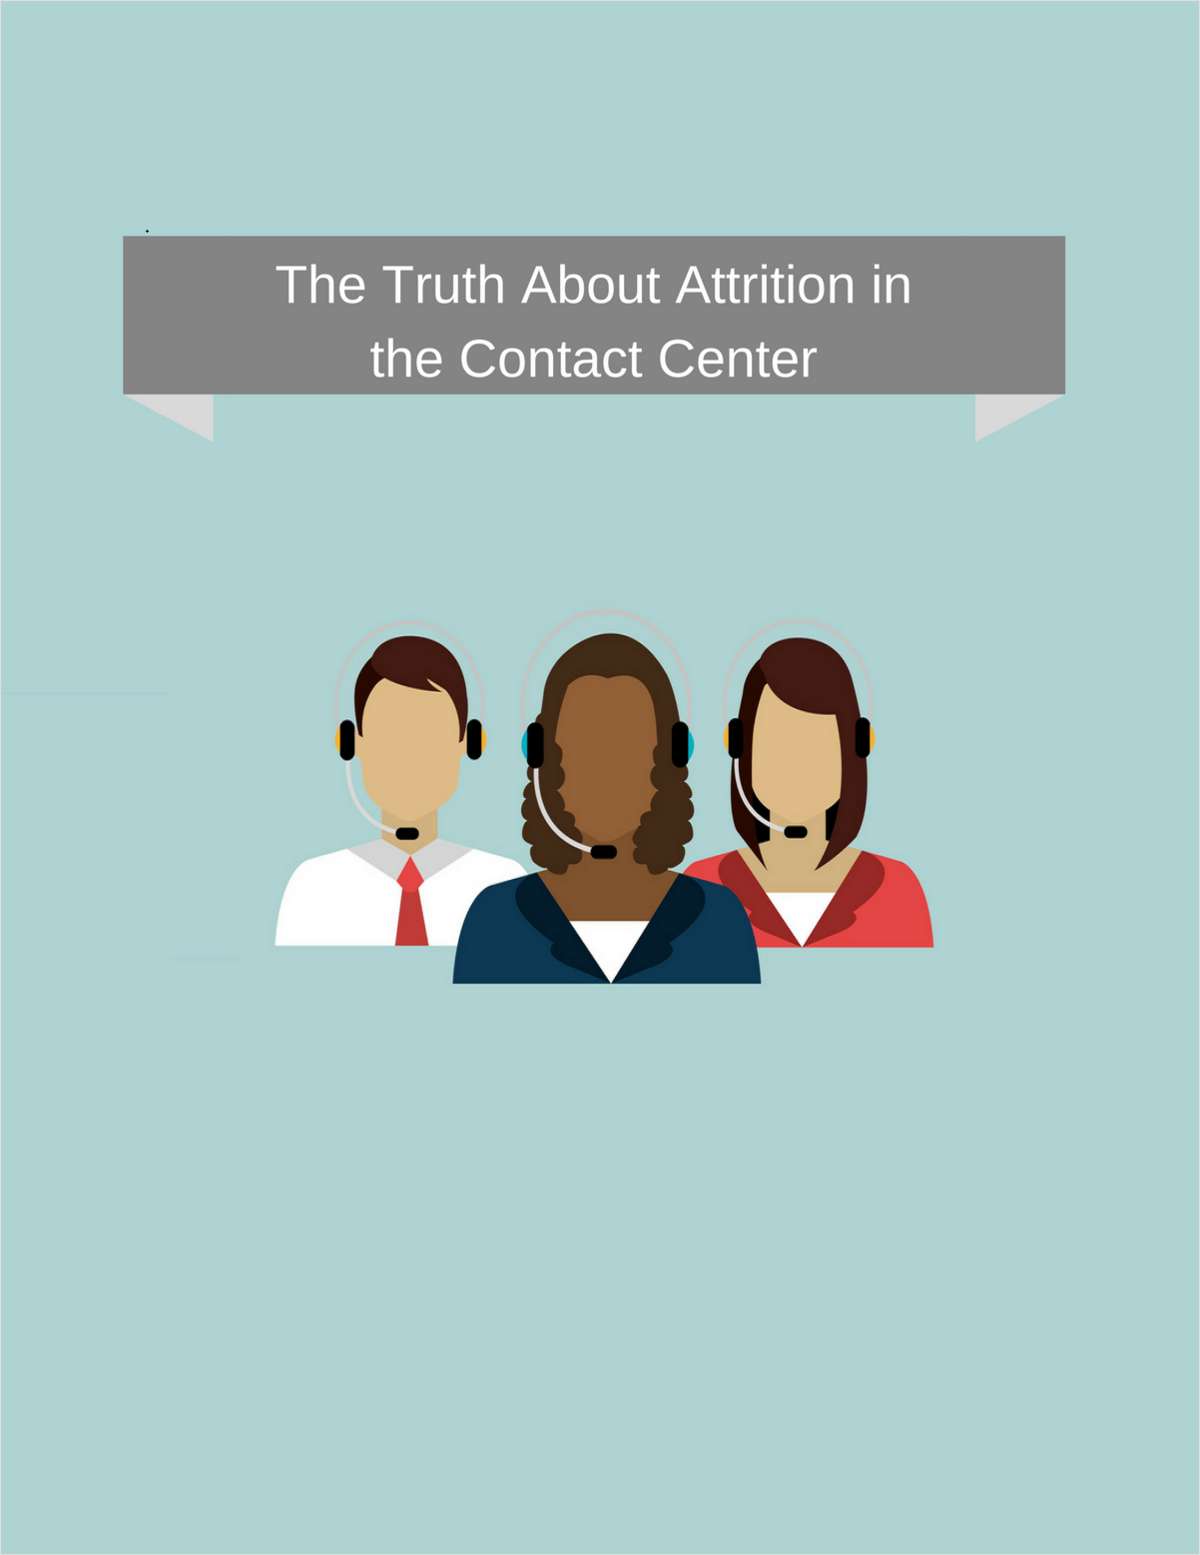 The Truth About Attrition in the Contact Center